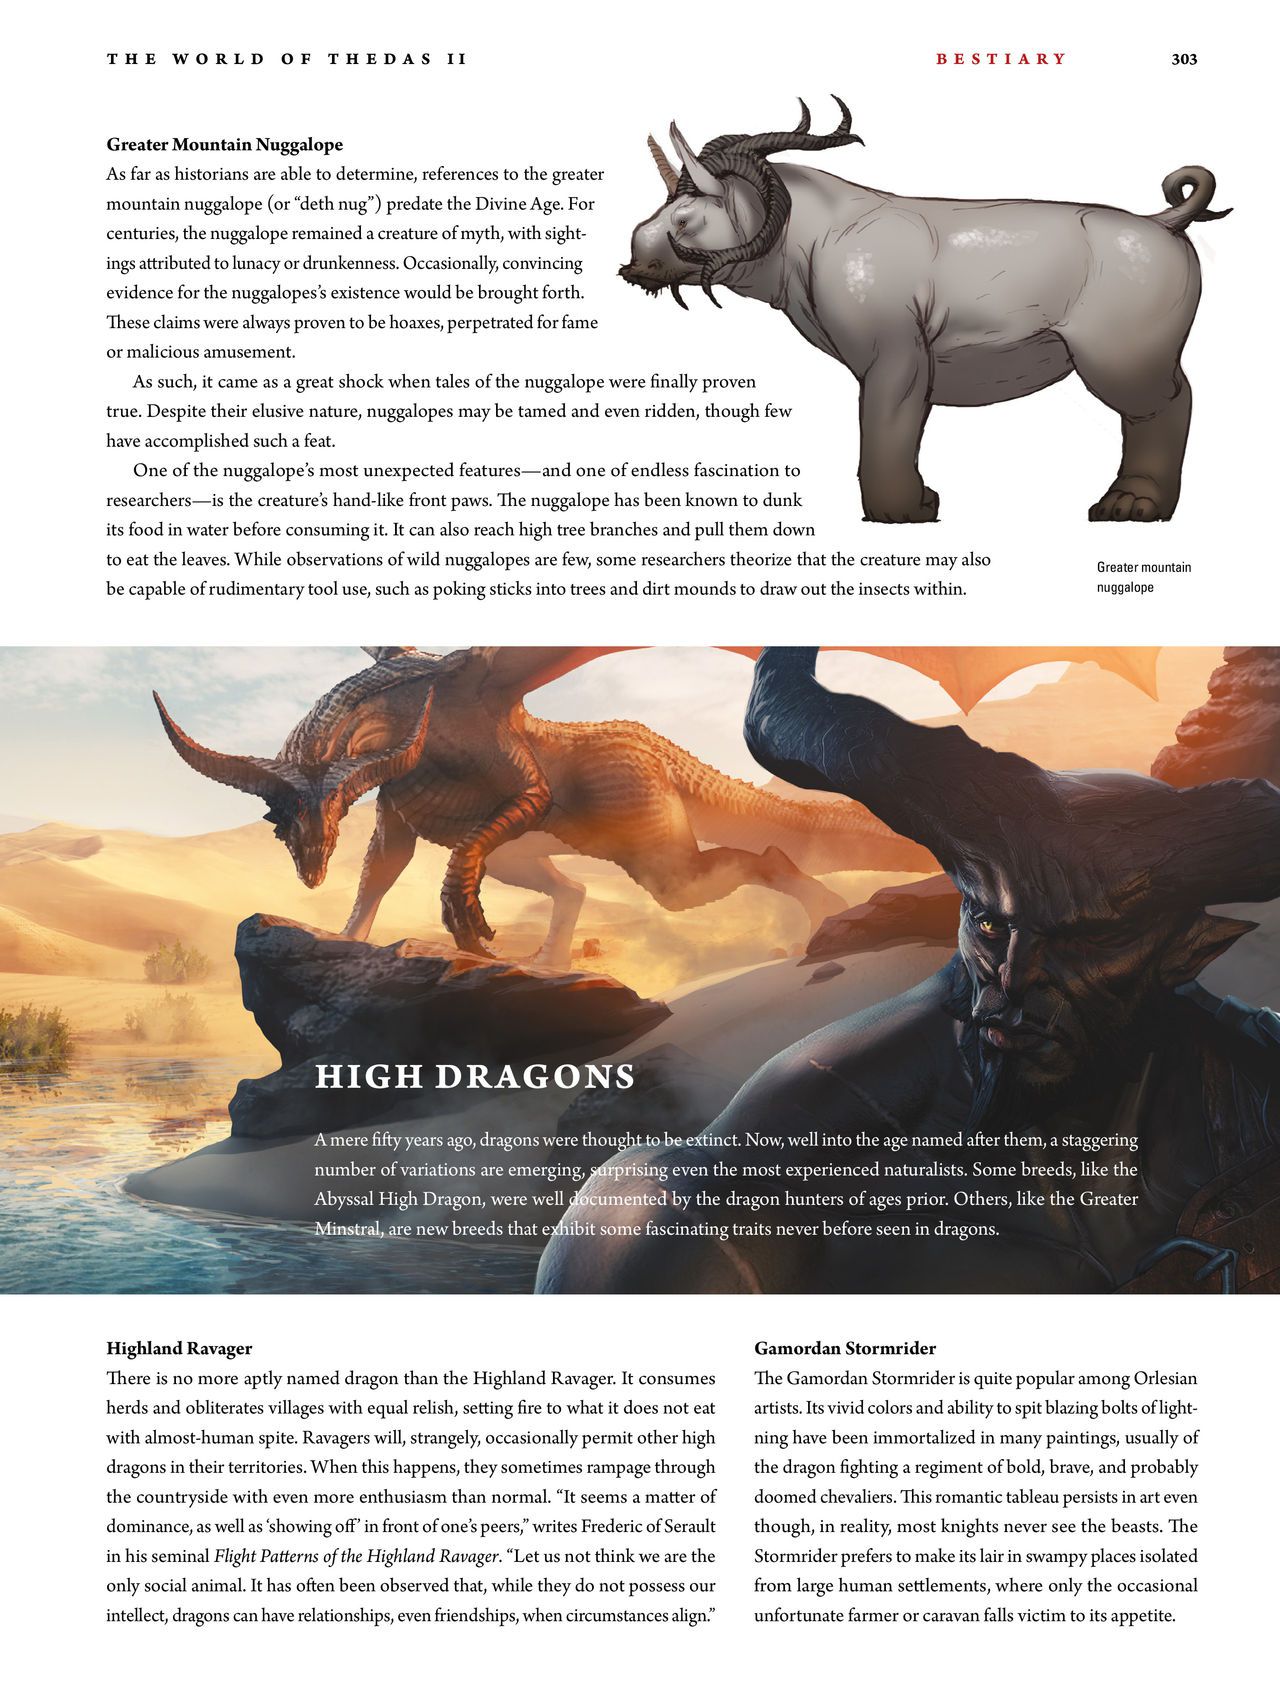 Dragon Age - The World of Thedas v02 294